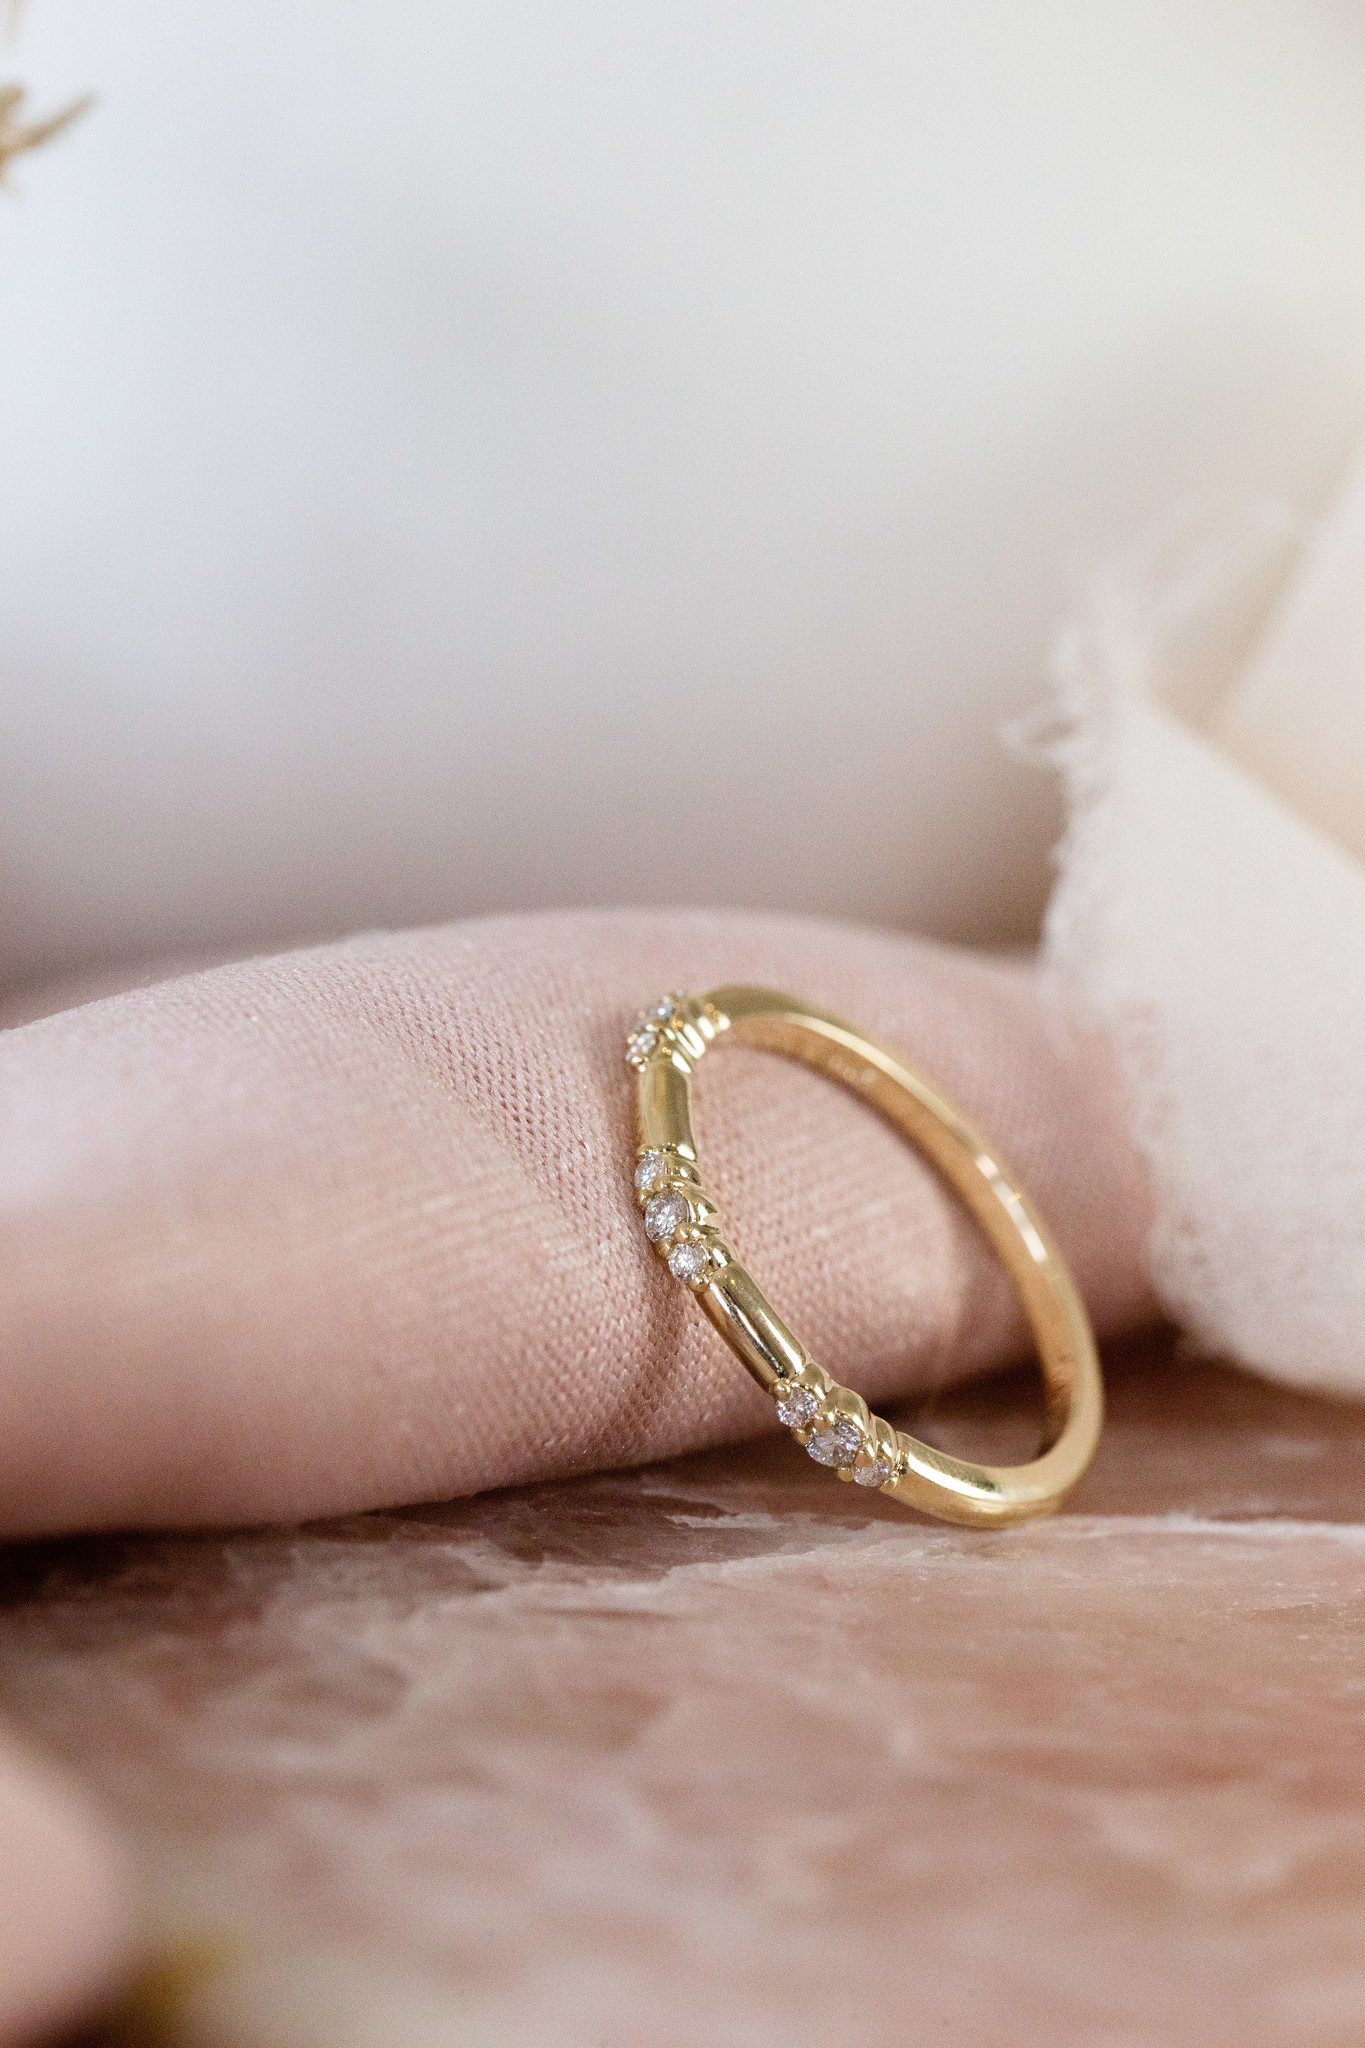 Footprints in the Sand Band Ring in 14K Yellow Gold - Walmart.com